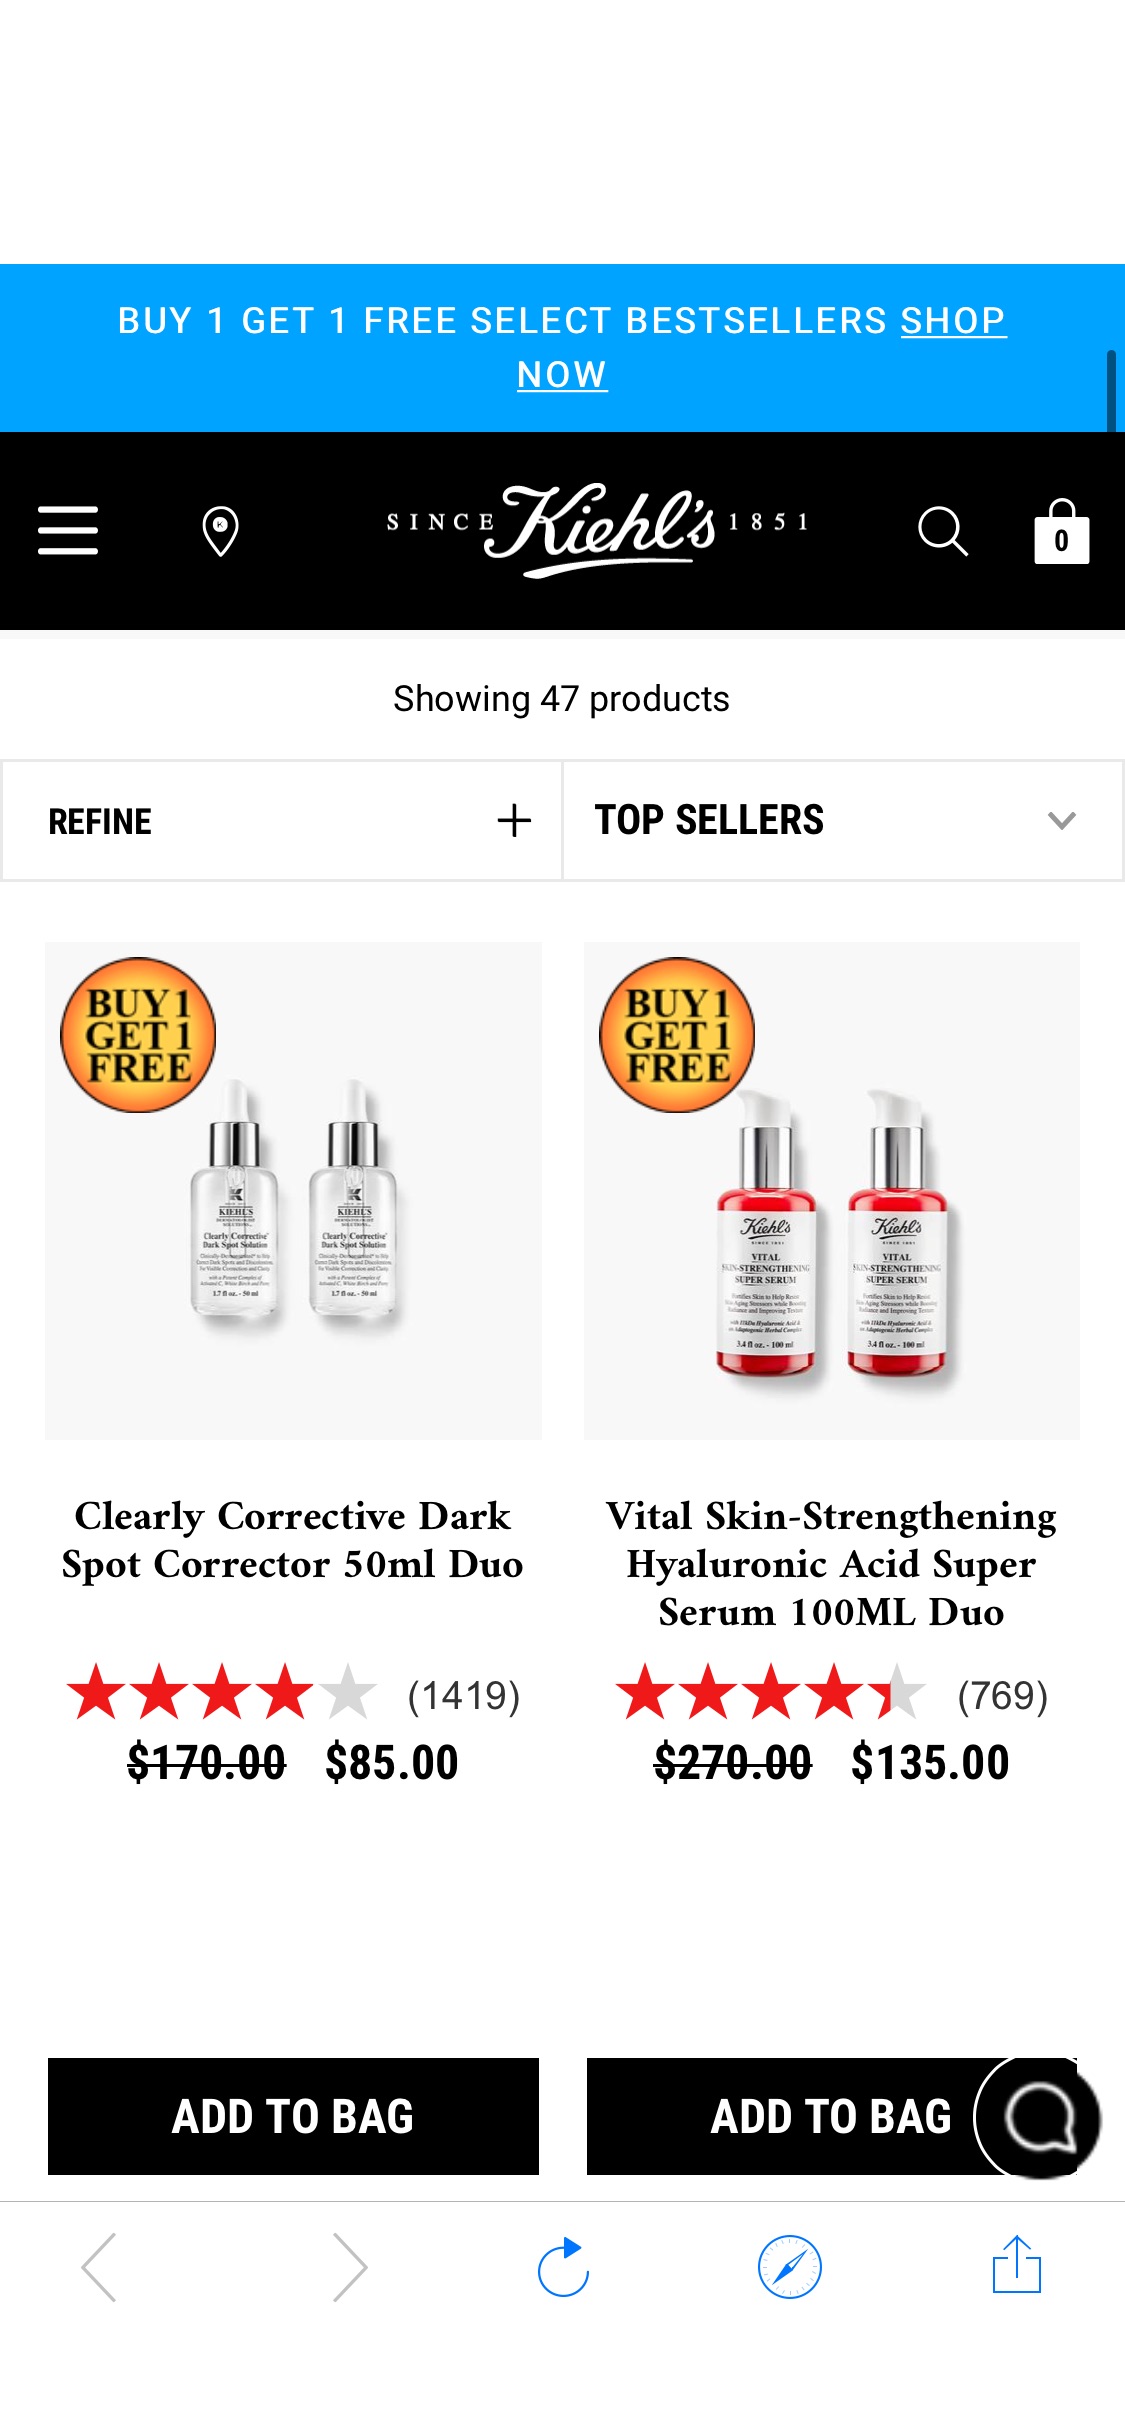 Our Best-Selling Skincare & Skin Care Products - Kiehl's